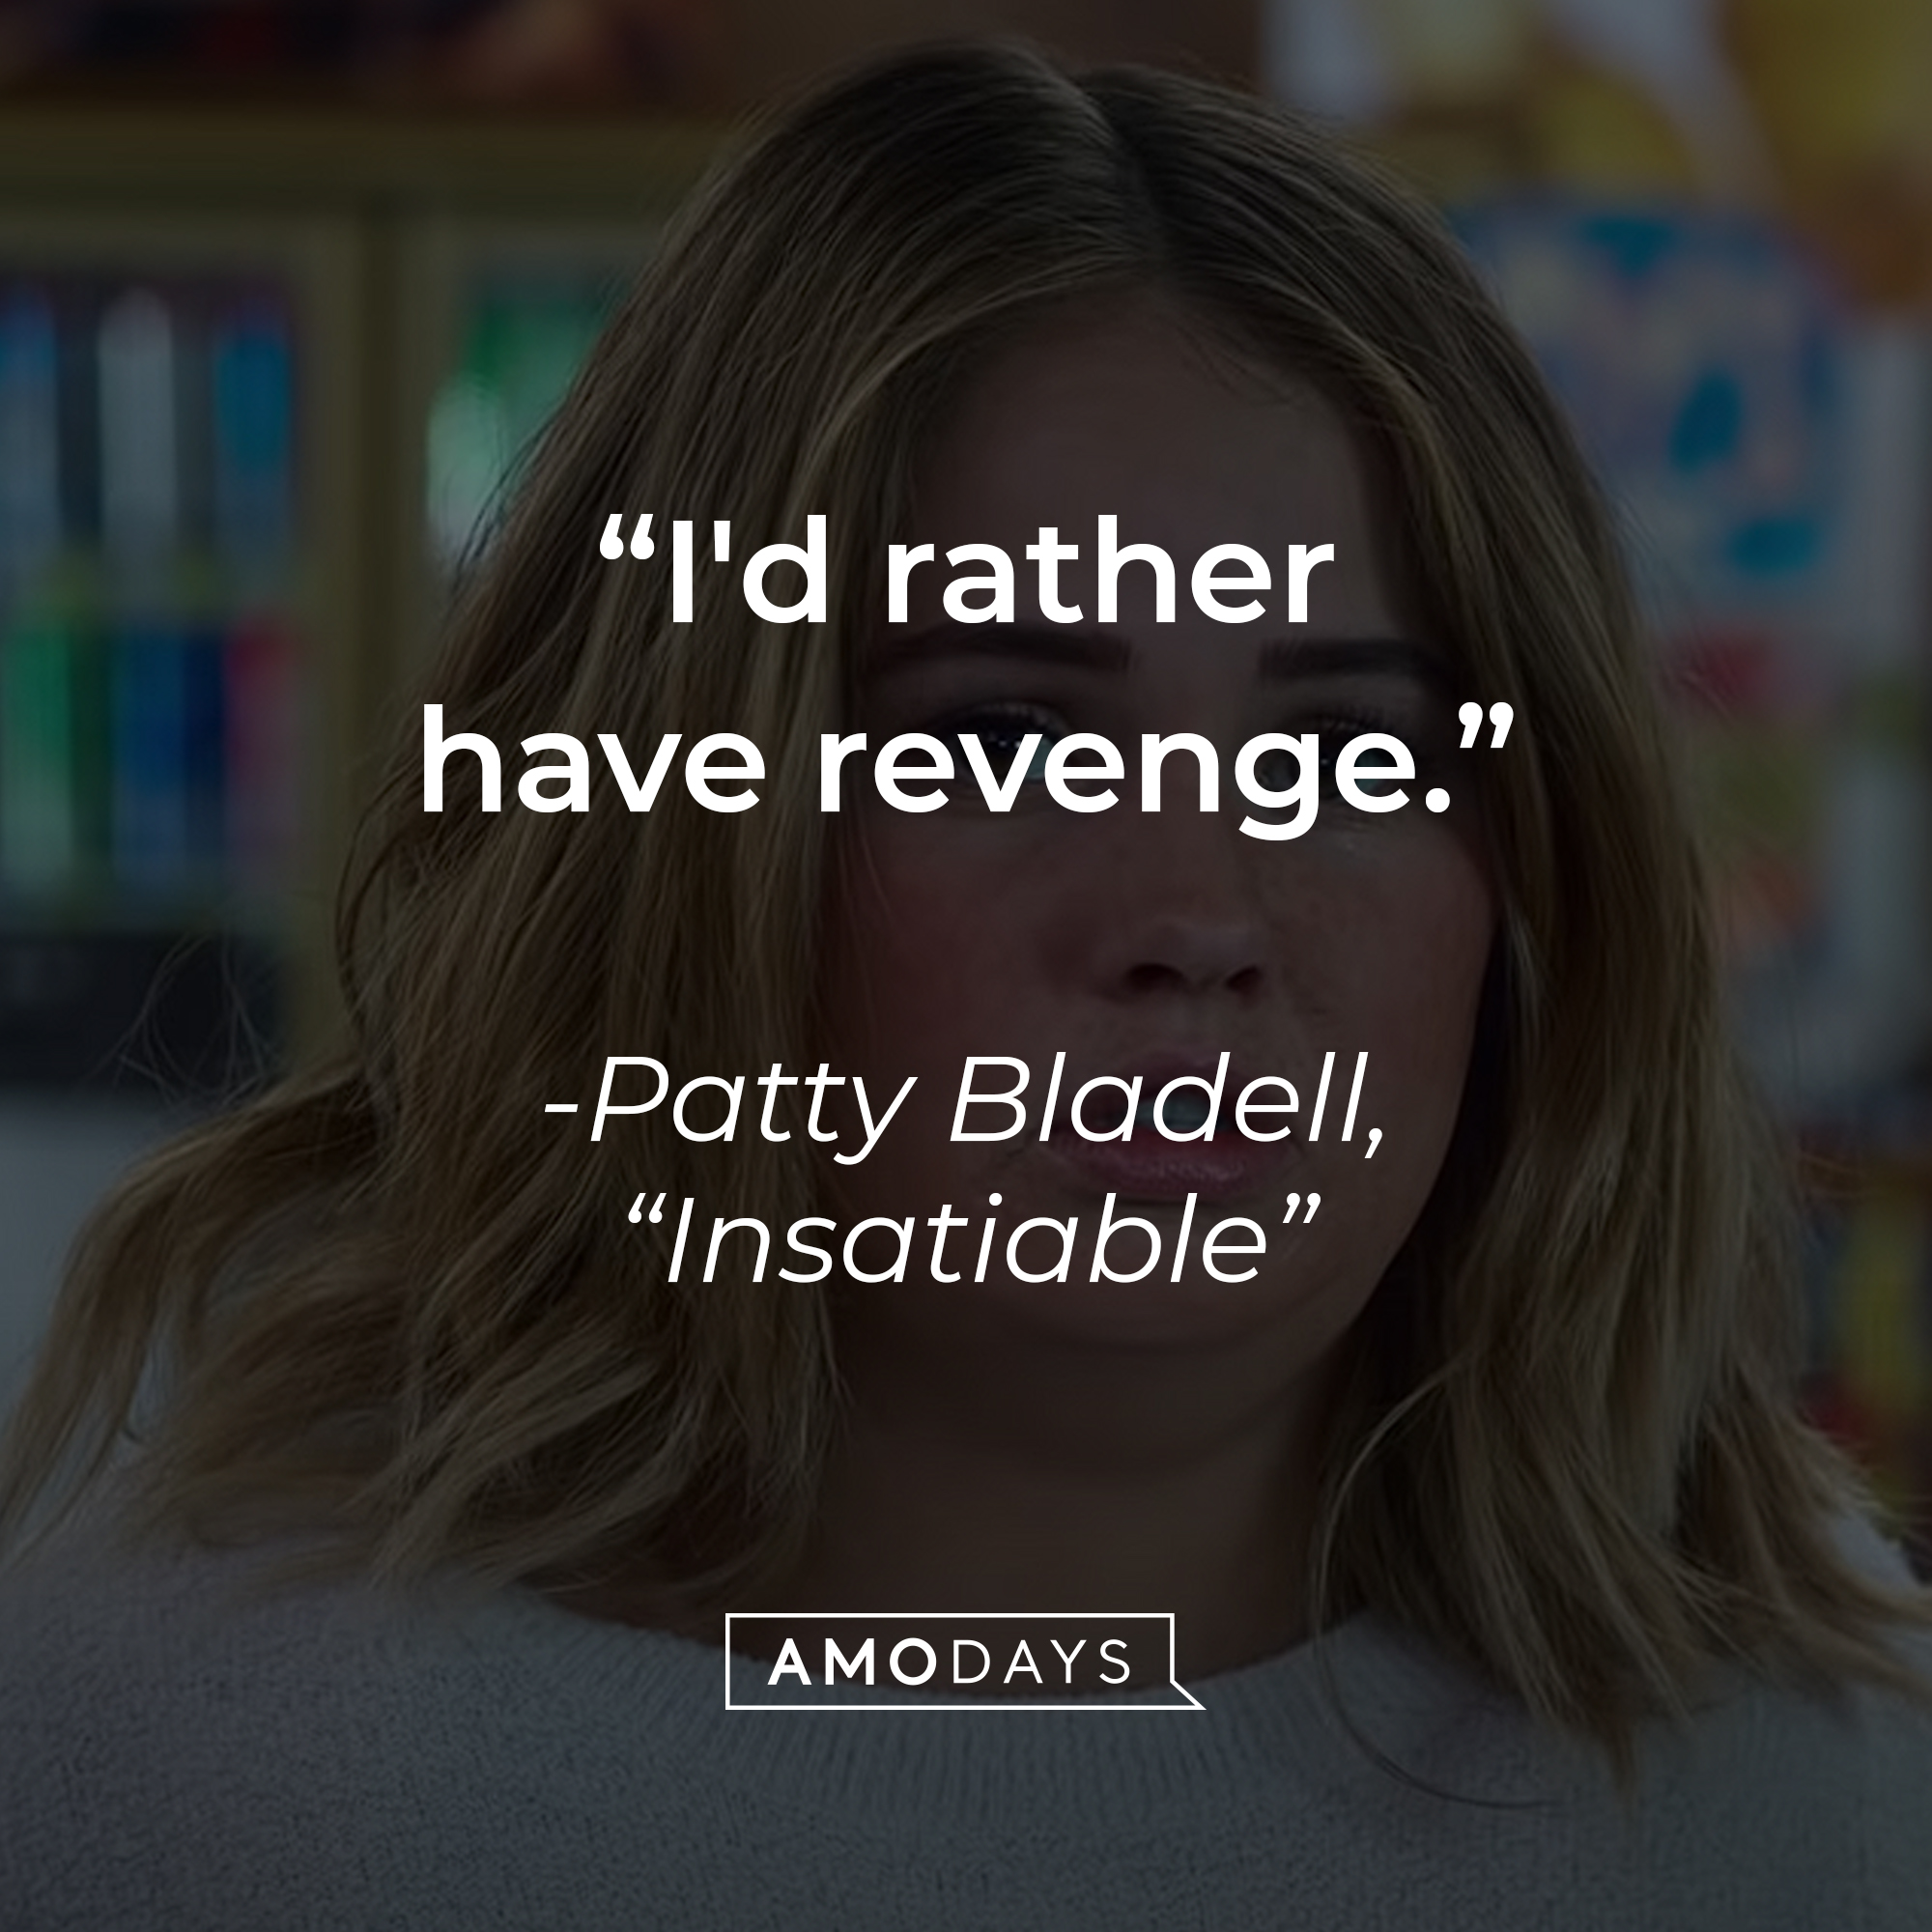 Patty Bladell with her quote on "Insatiable:" “I'd rather have revenge." | Source: Youtube.com/Netflix